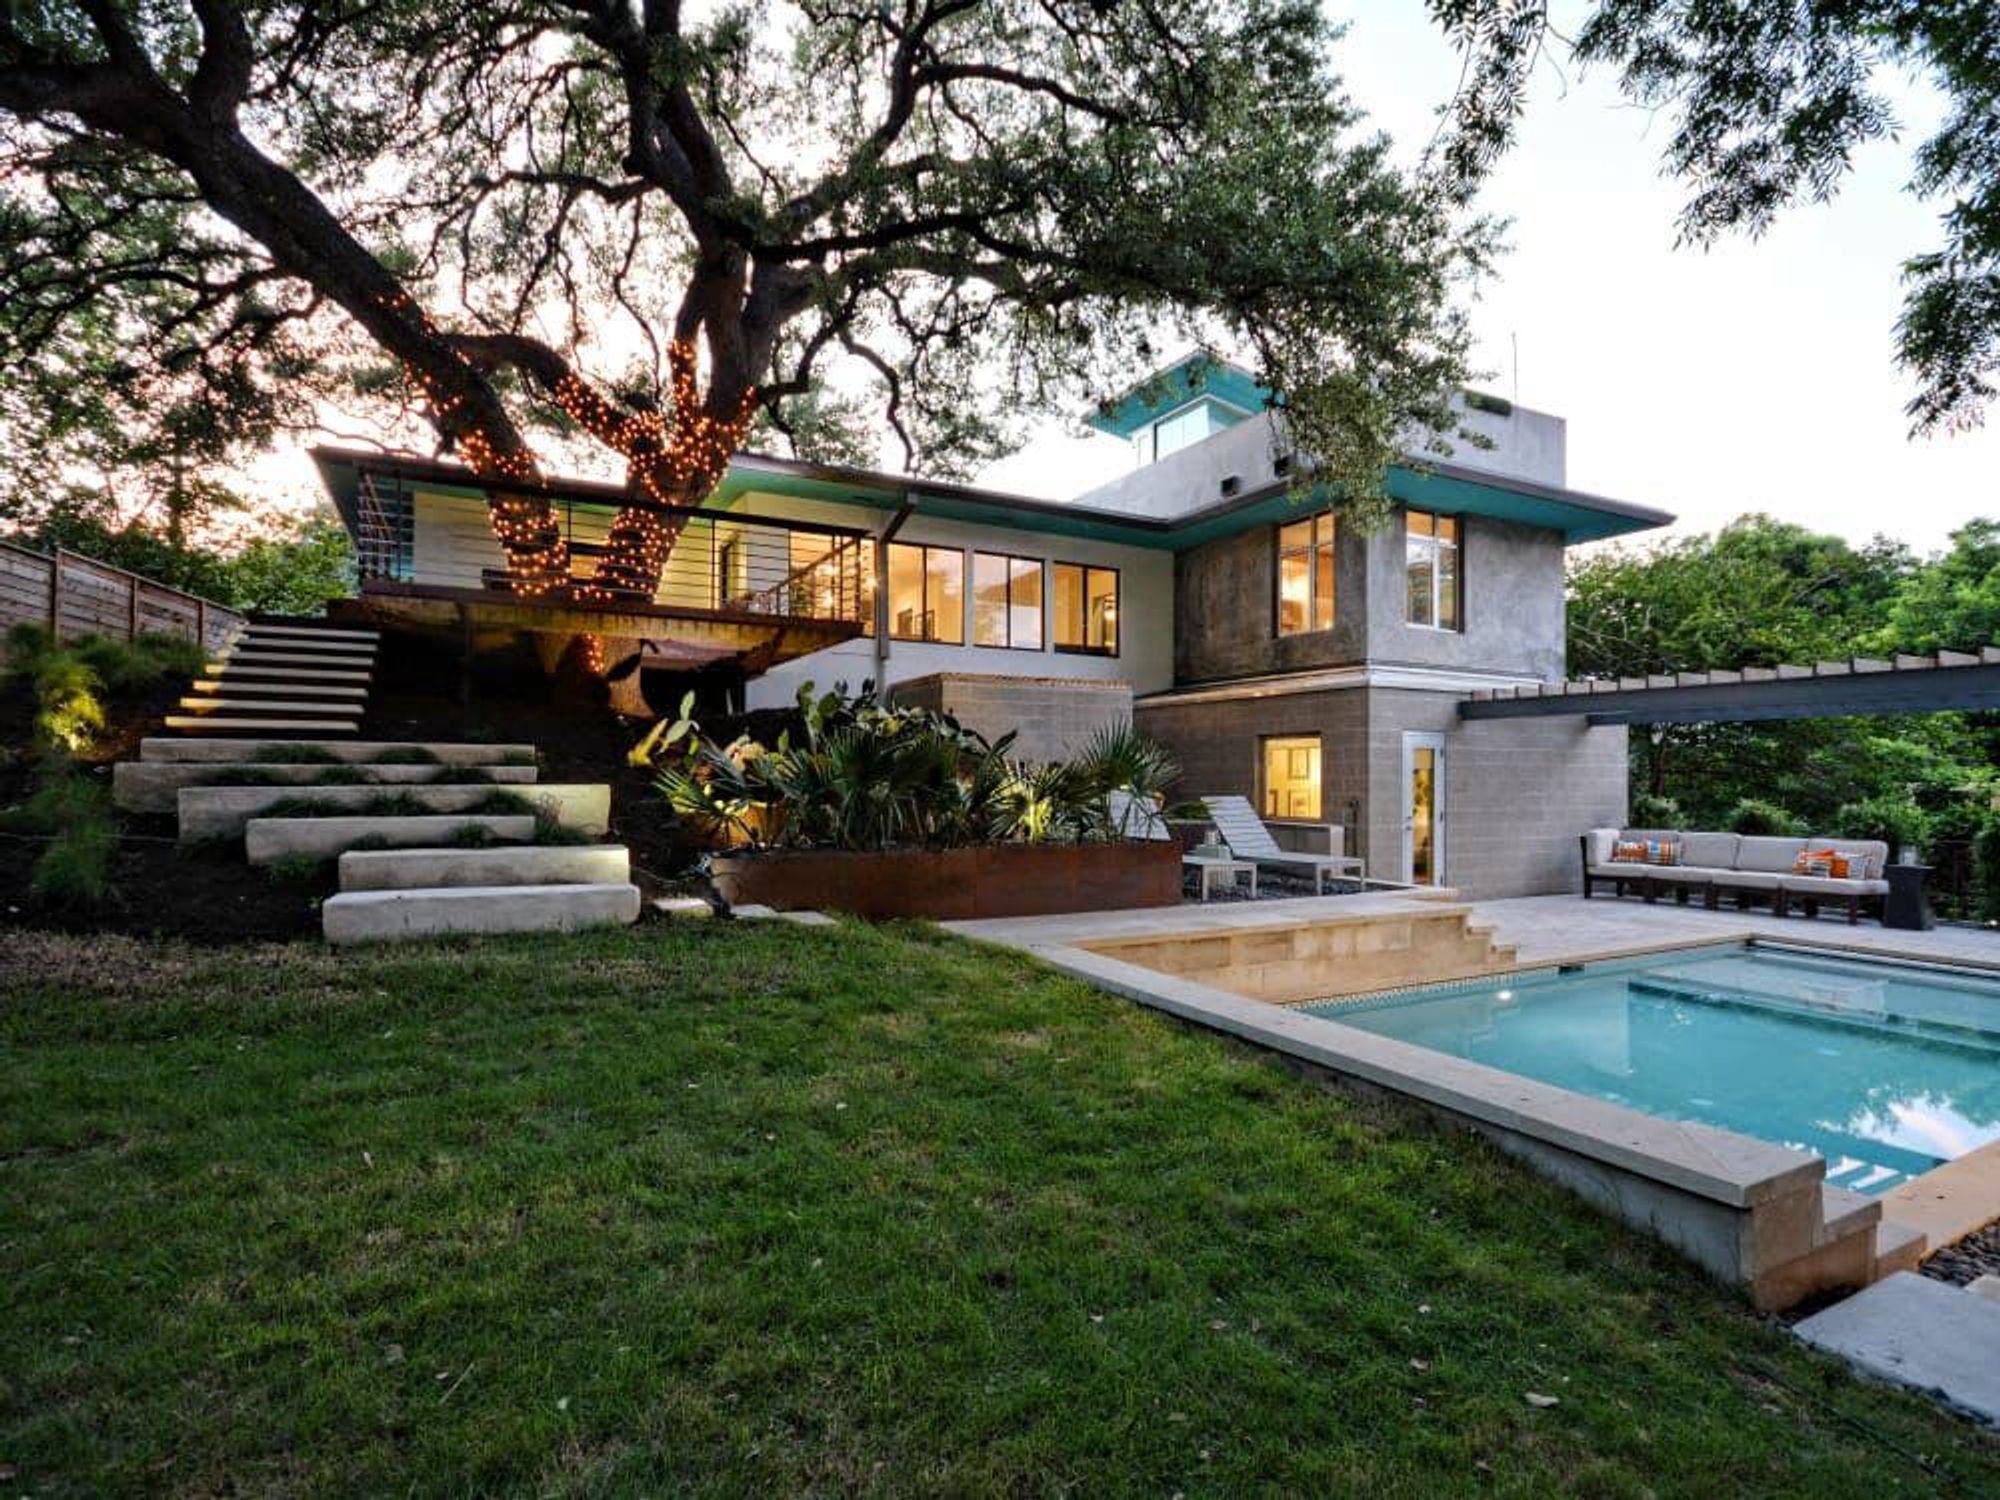 Median home prices are currently sitting at $545,000 in Austin. Courtesy of Realty Austin